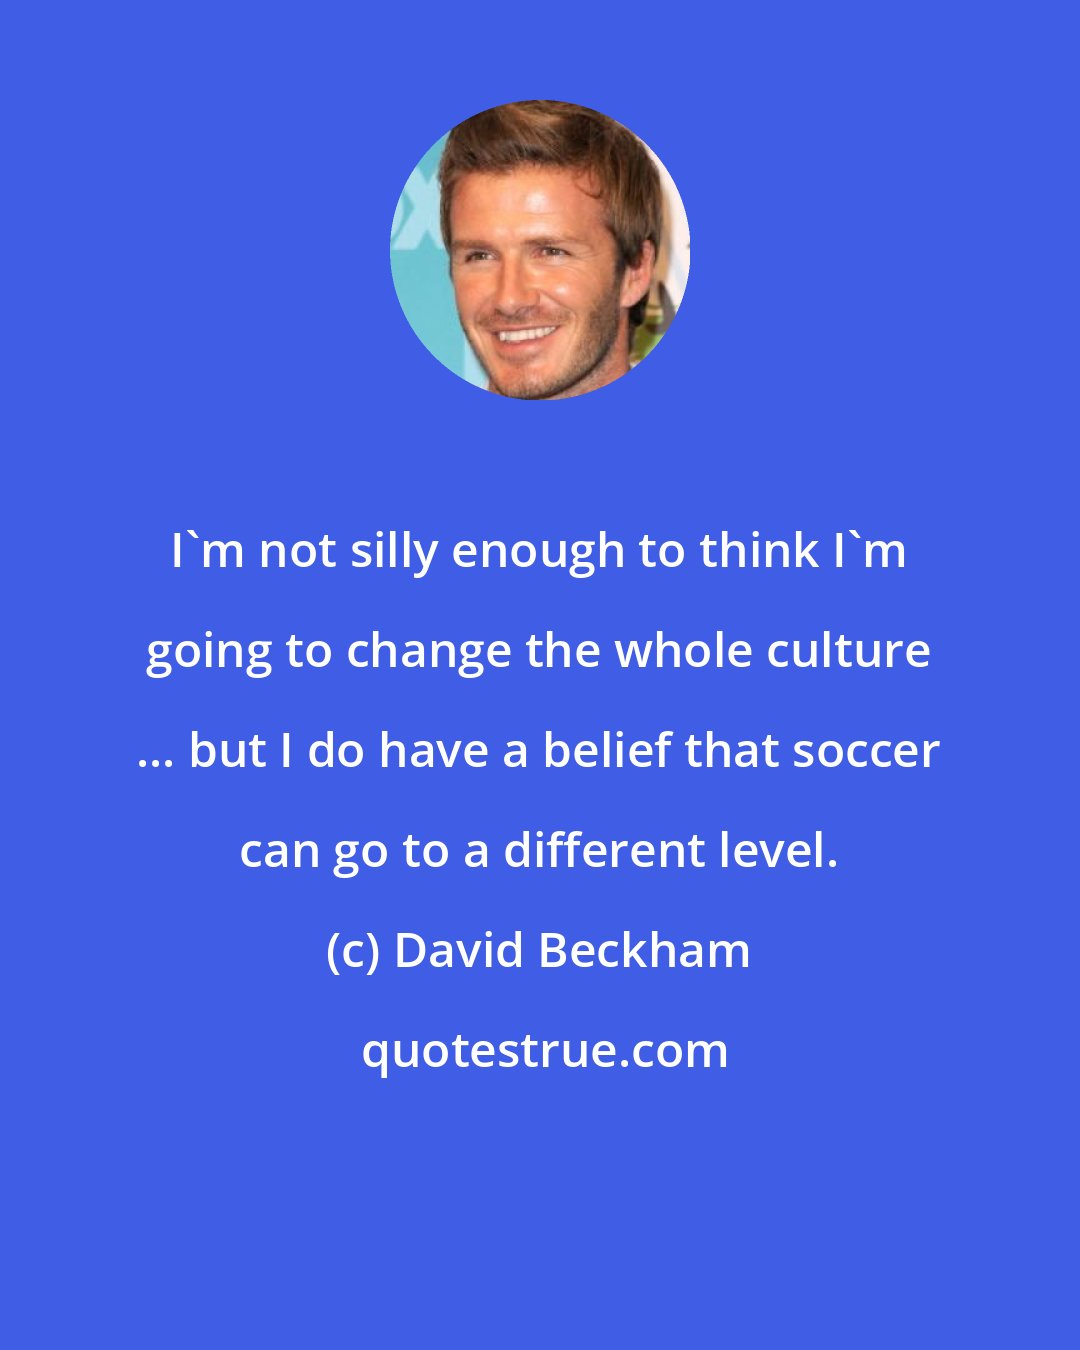 David Beckham: I'm not silly enough to think I'm going to change the whole culture ... but I do have a belief that soccer can go to a different level.